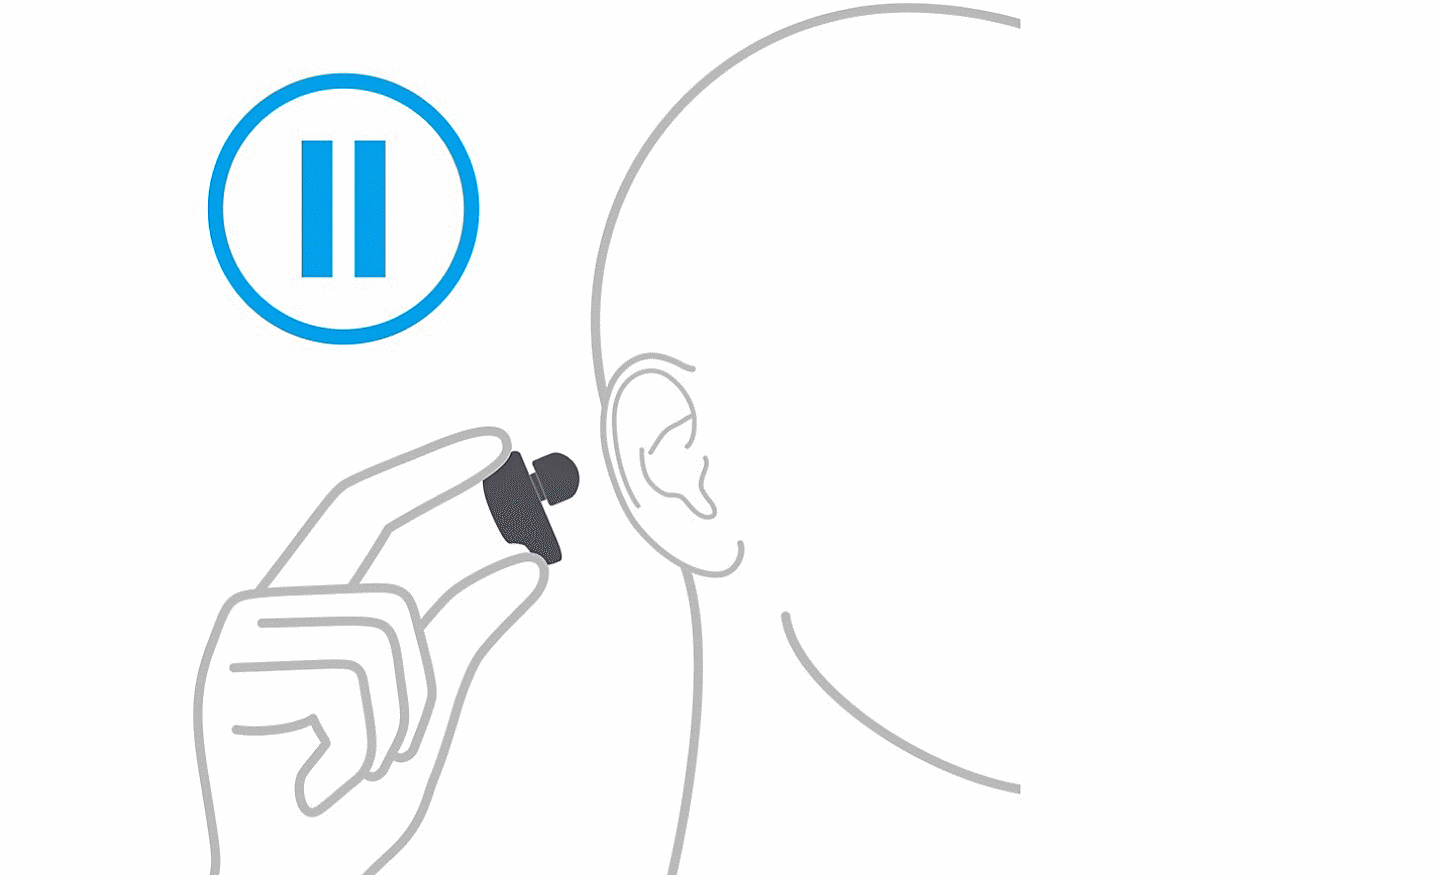 Illustration of person removing an earbud from their ear